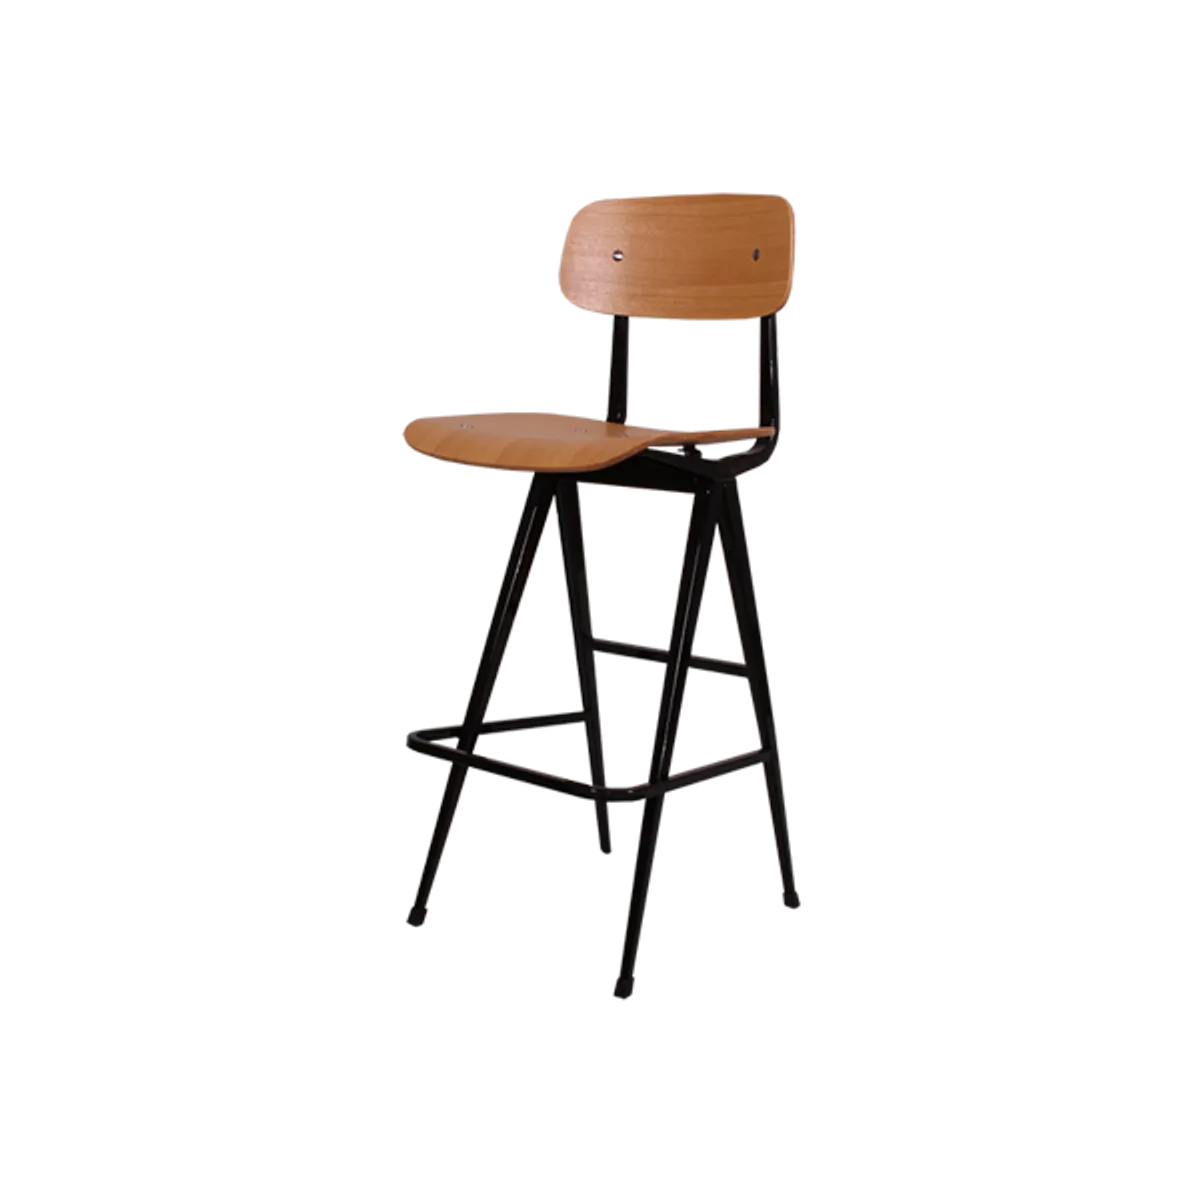 Web Venture Bar Stool Wooden And Steel Stool Classic Design For Cafes Bars And Restaurants 023